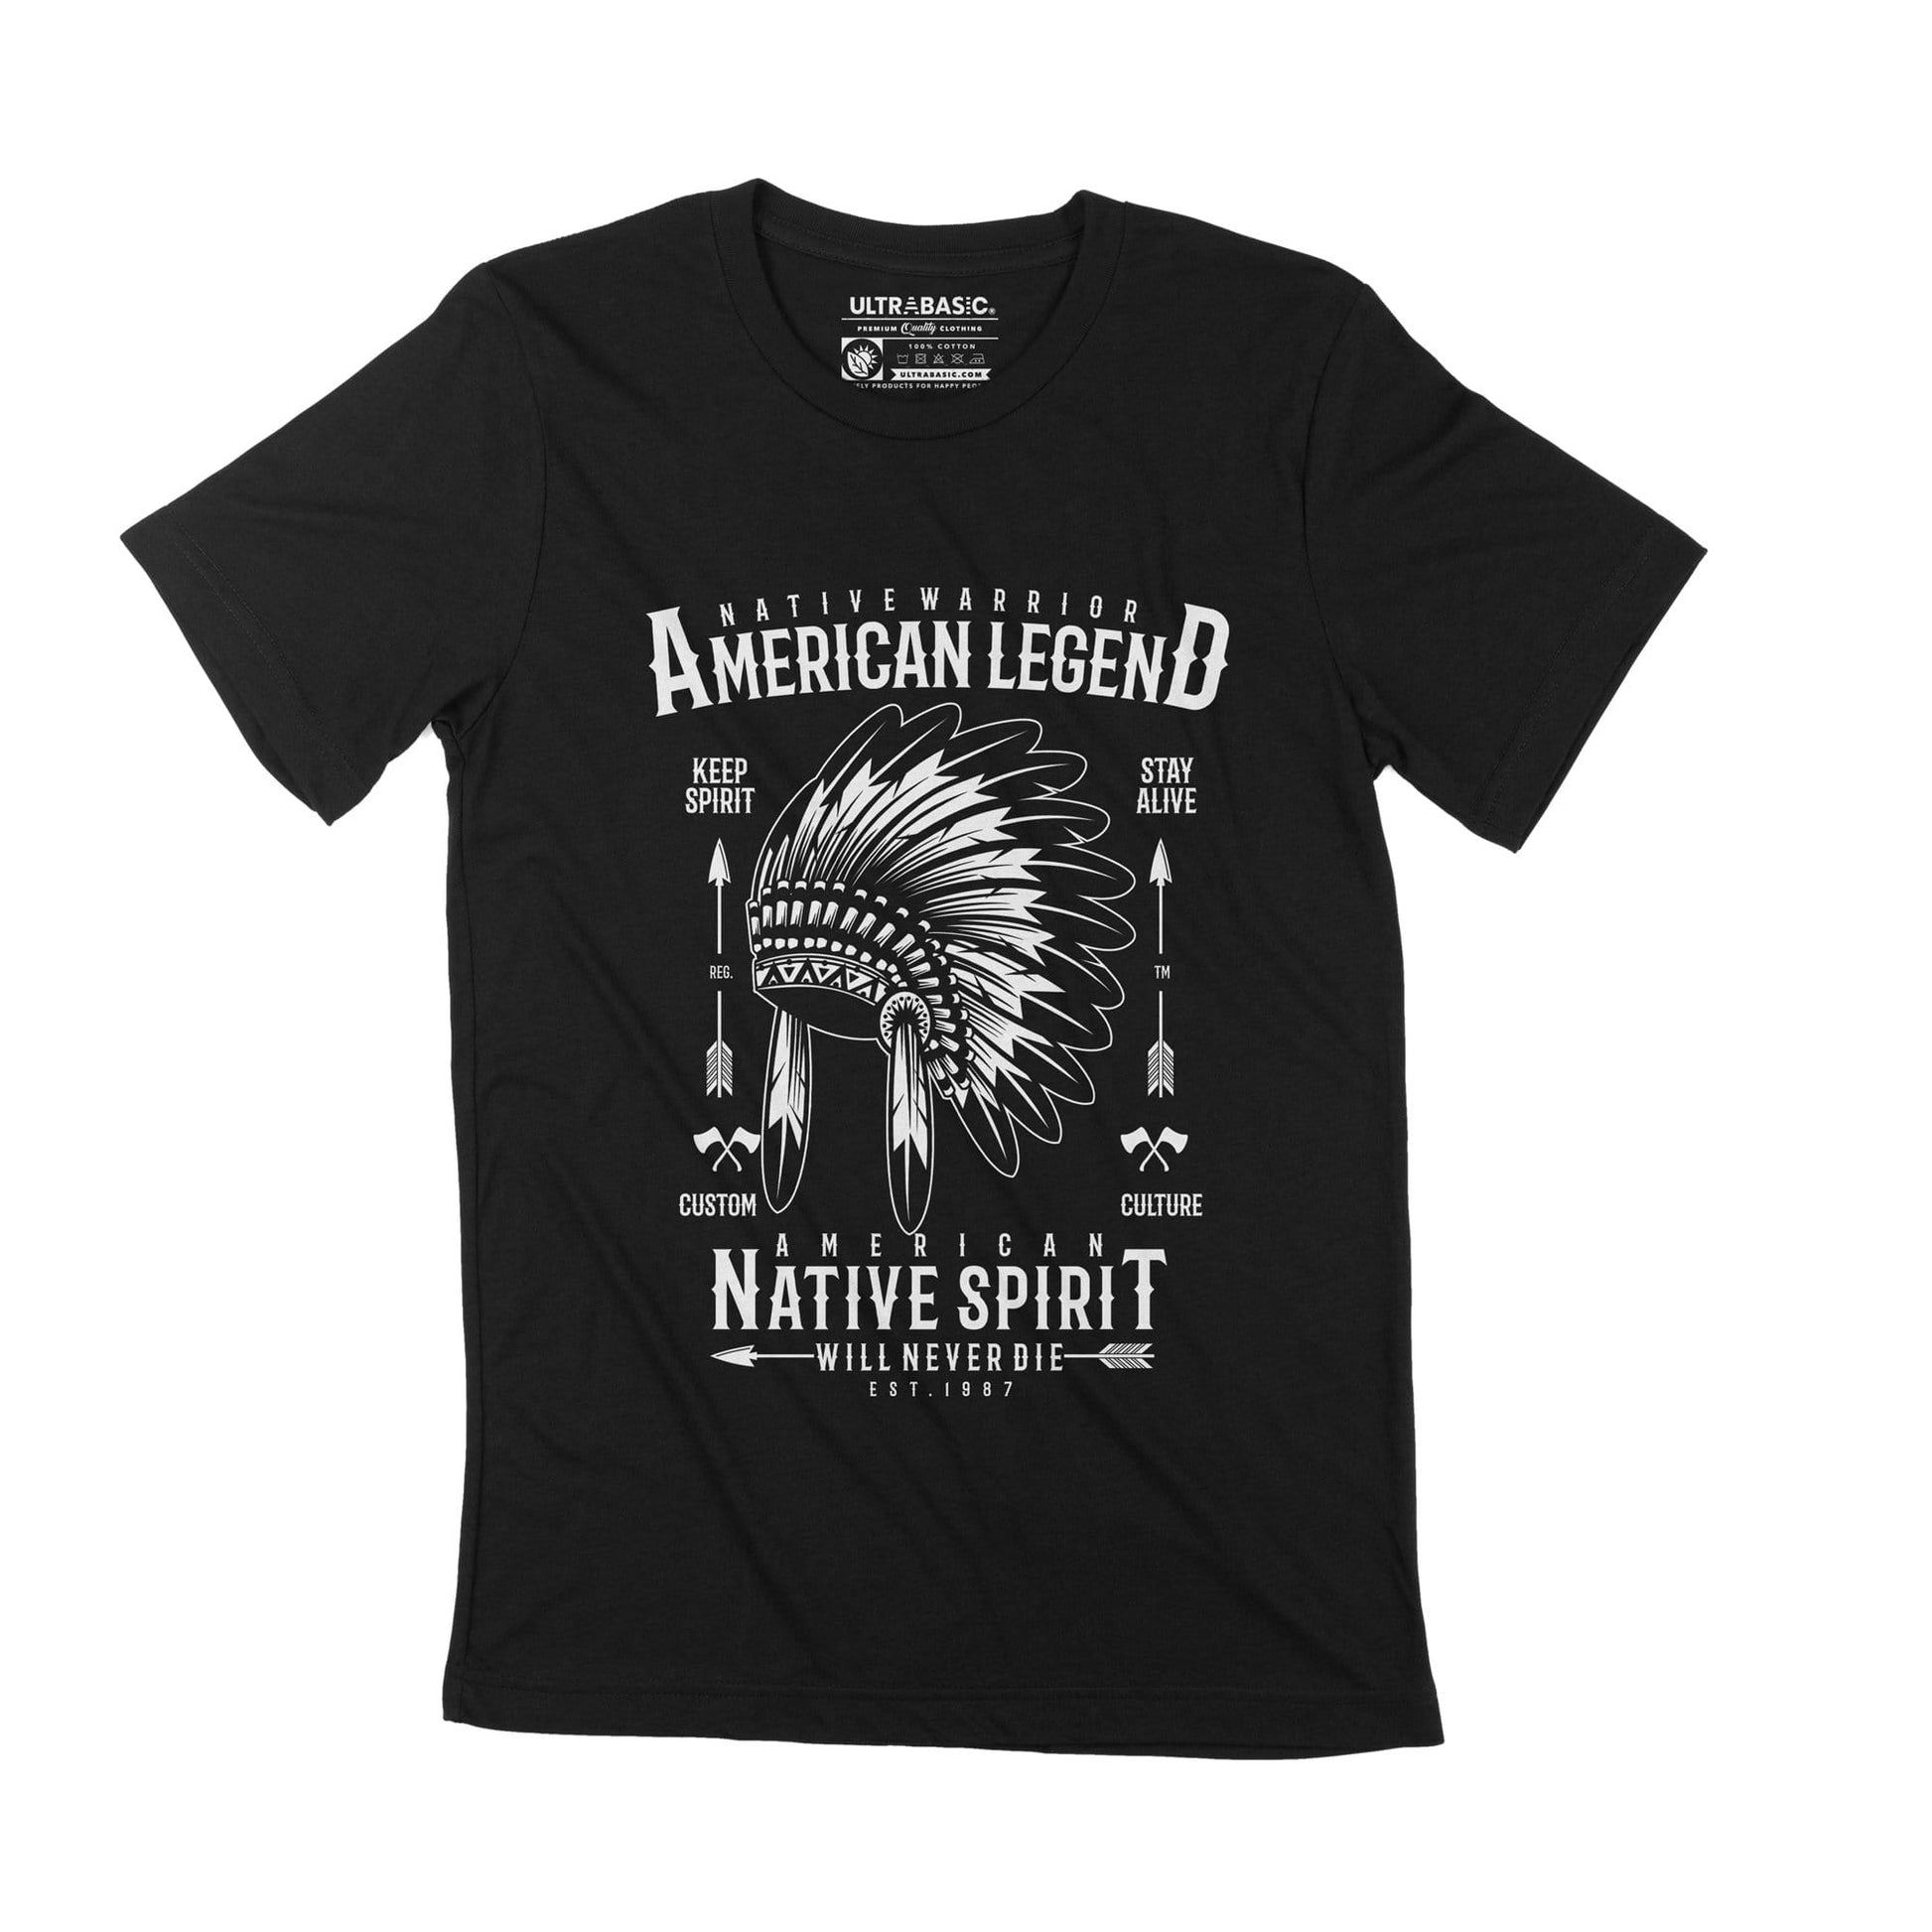 ULTRABASIC Native Indian Graphic Men's T-Shirt - American Legend Birthday Tee indigenous thunderbird dream catcher cherokee apache redskins chief redskin sioux vintage inspirational saying adult dad apparel print ideas merch present fathers day merchandise clothing christmas unisex classic casual slogan retro motivation love 